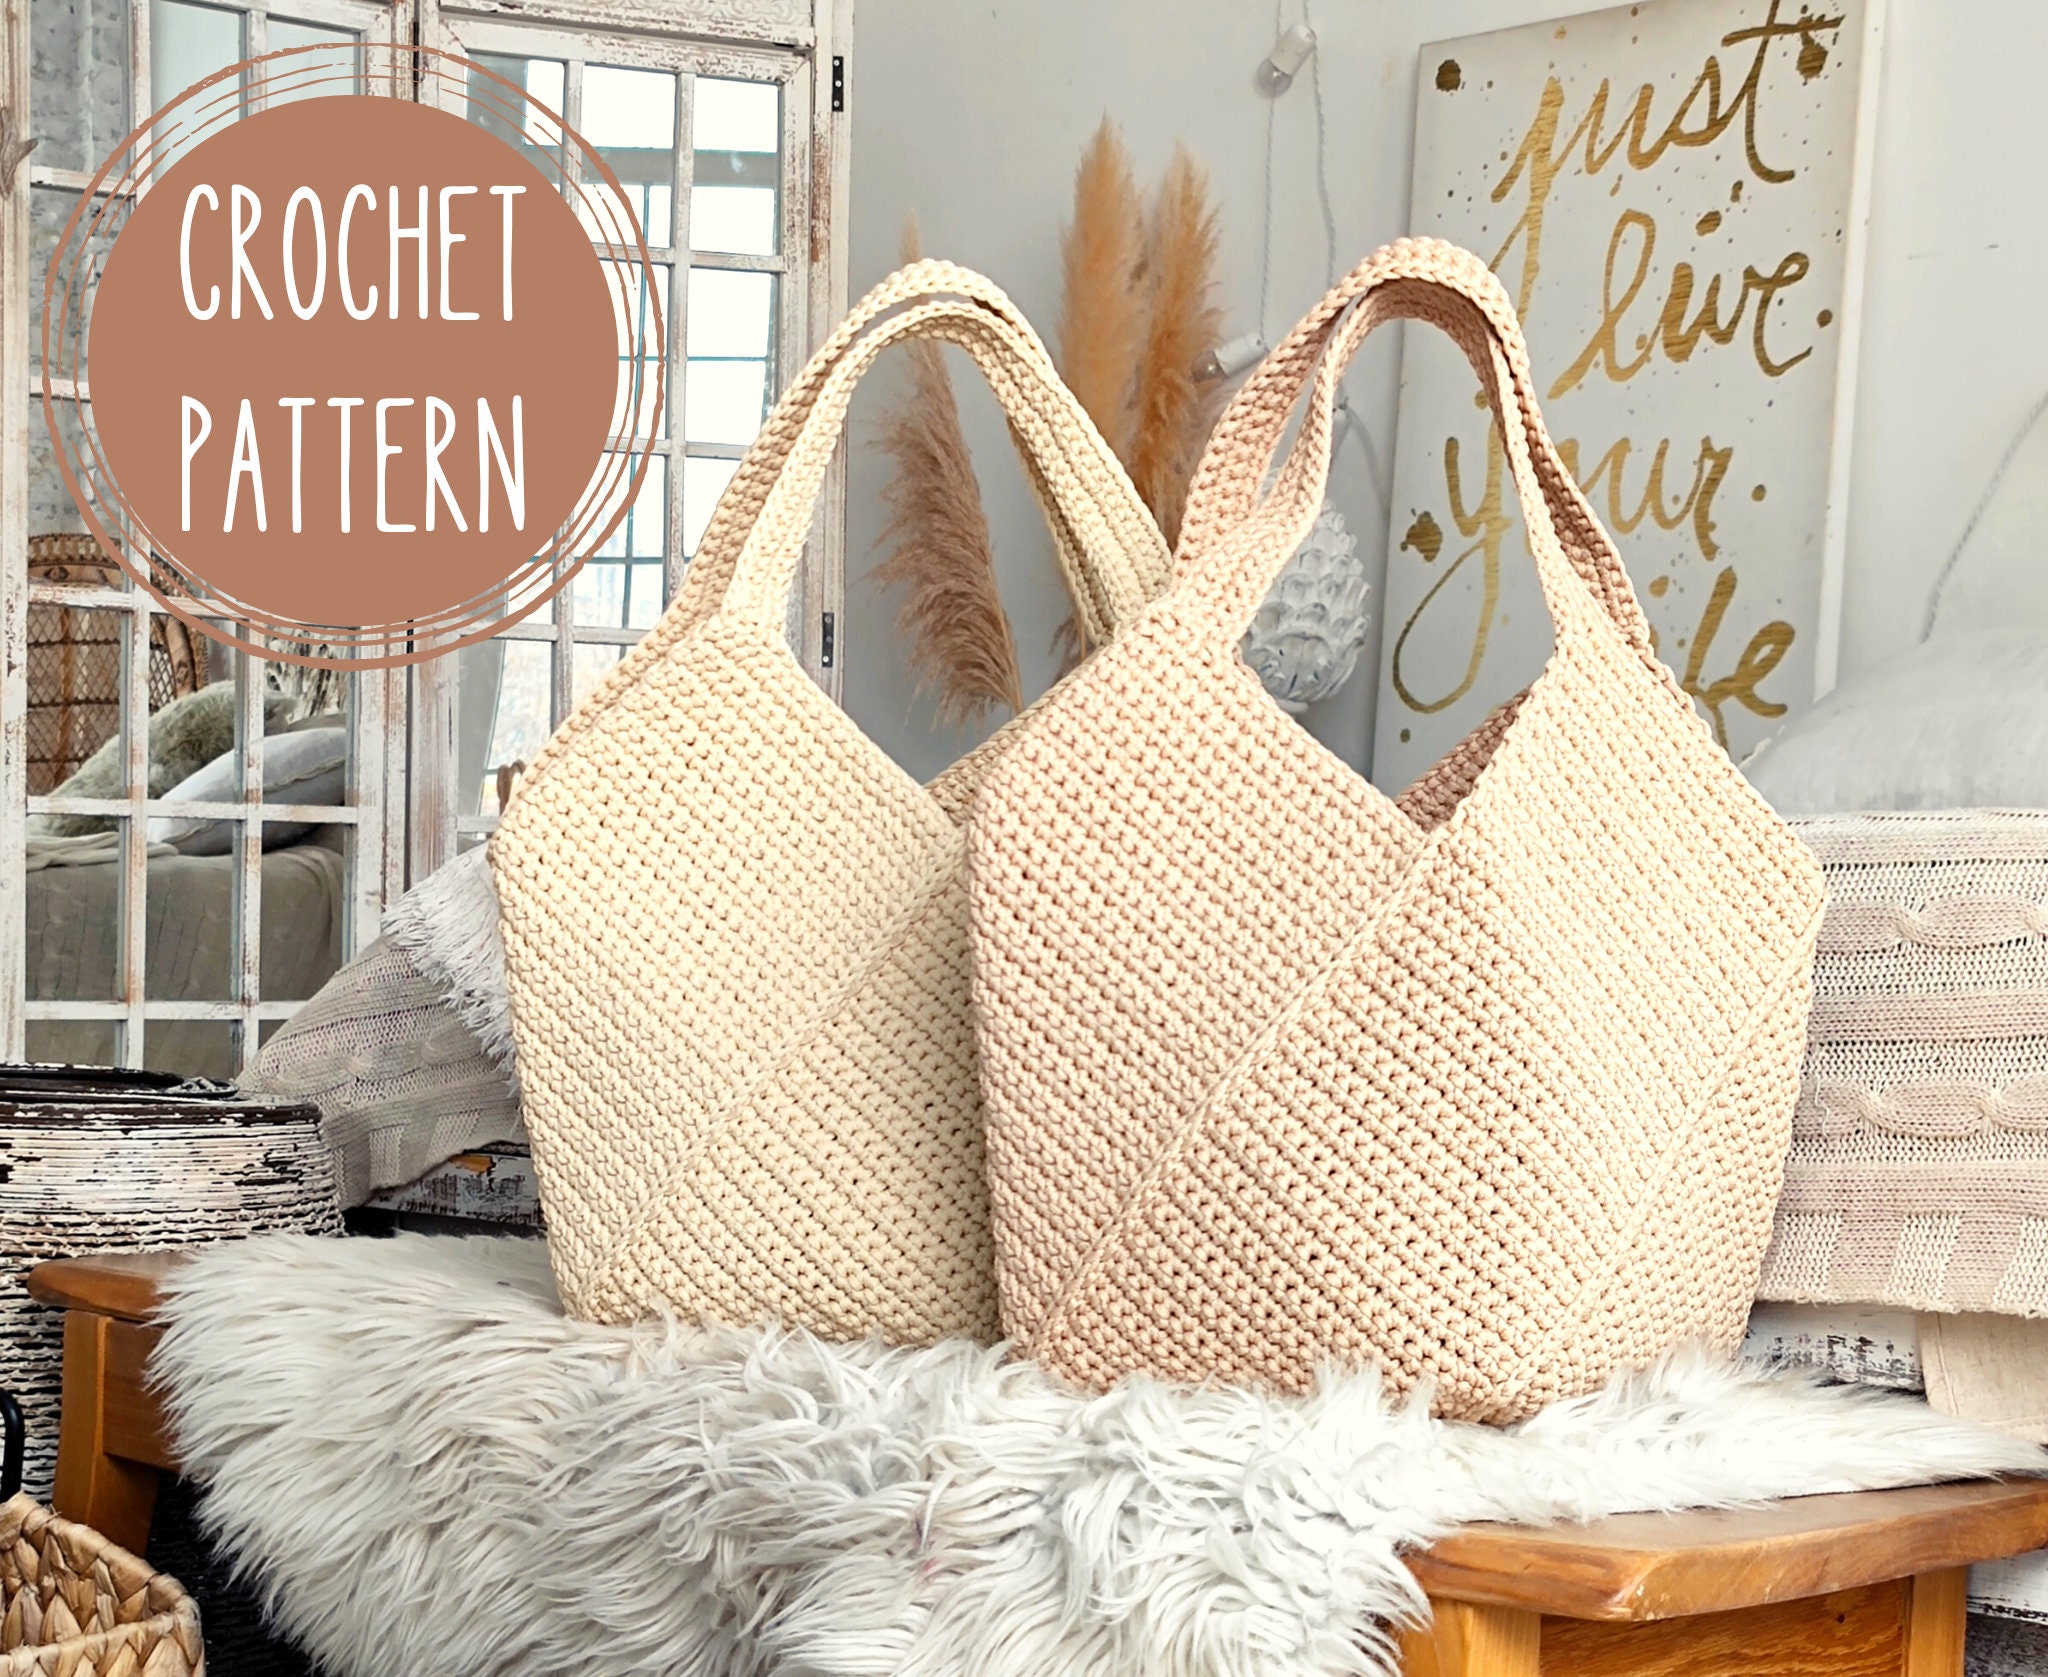 Summer Tote and Bag Ideas - Your Crochet